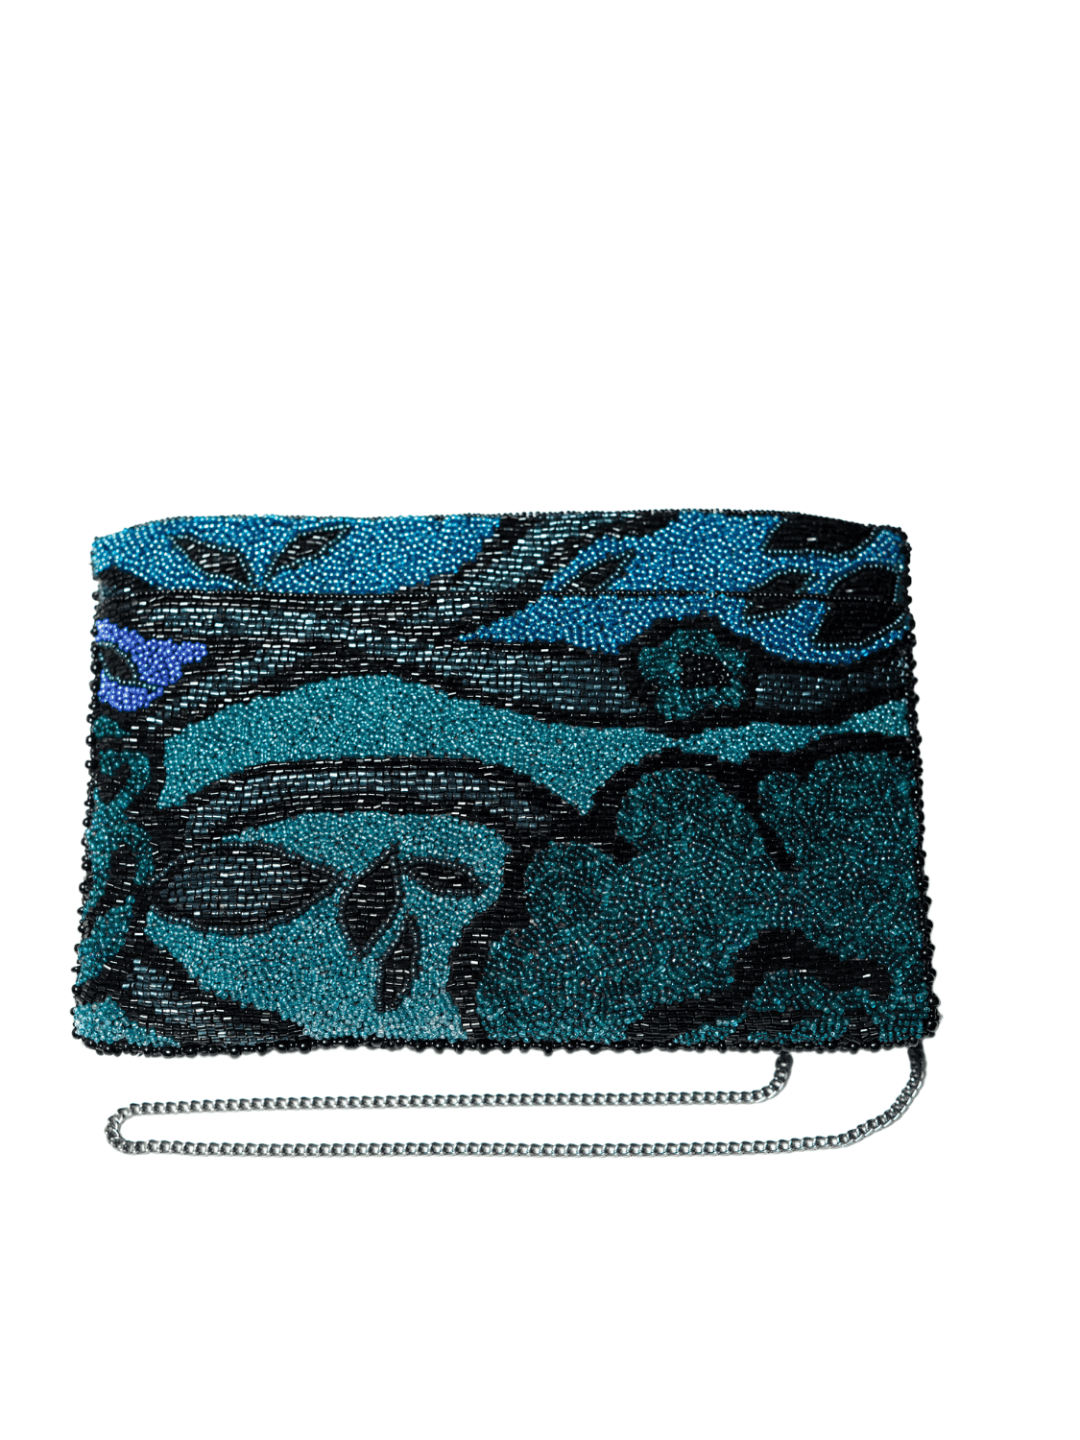 Blue Stone Beaded Embroidered Clutch Bag With Sliver Chain